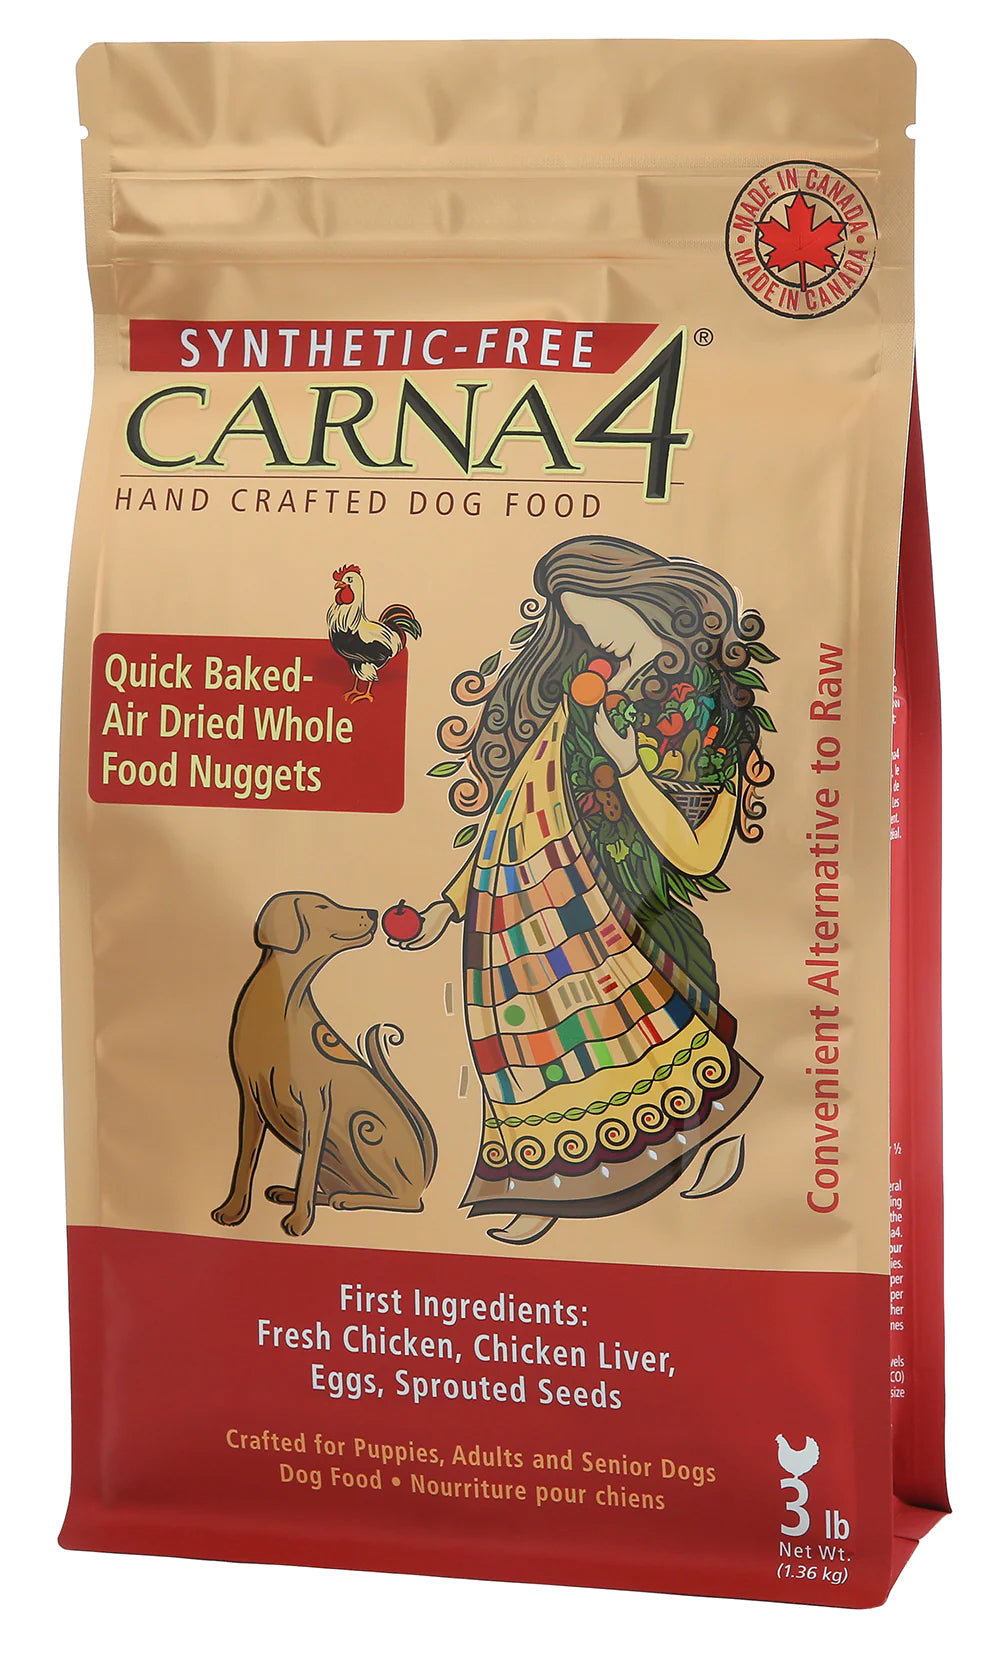 Carna4 - Quick Baked - Air Dried Whole Food Nuggets - Chicken